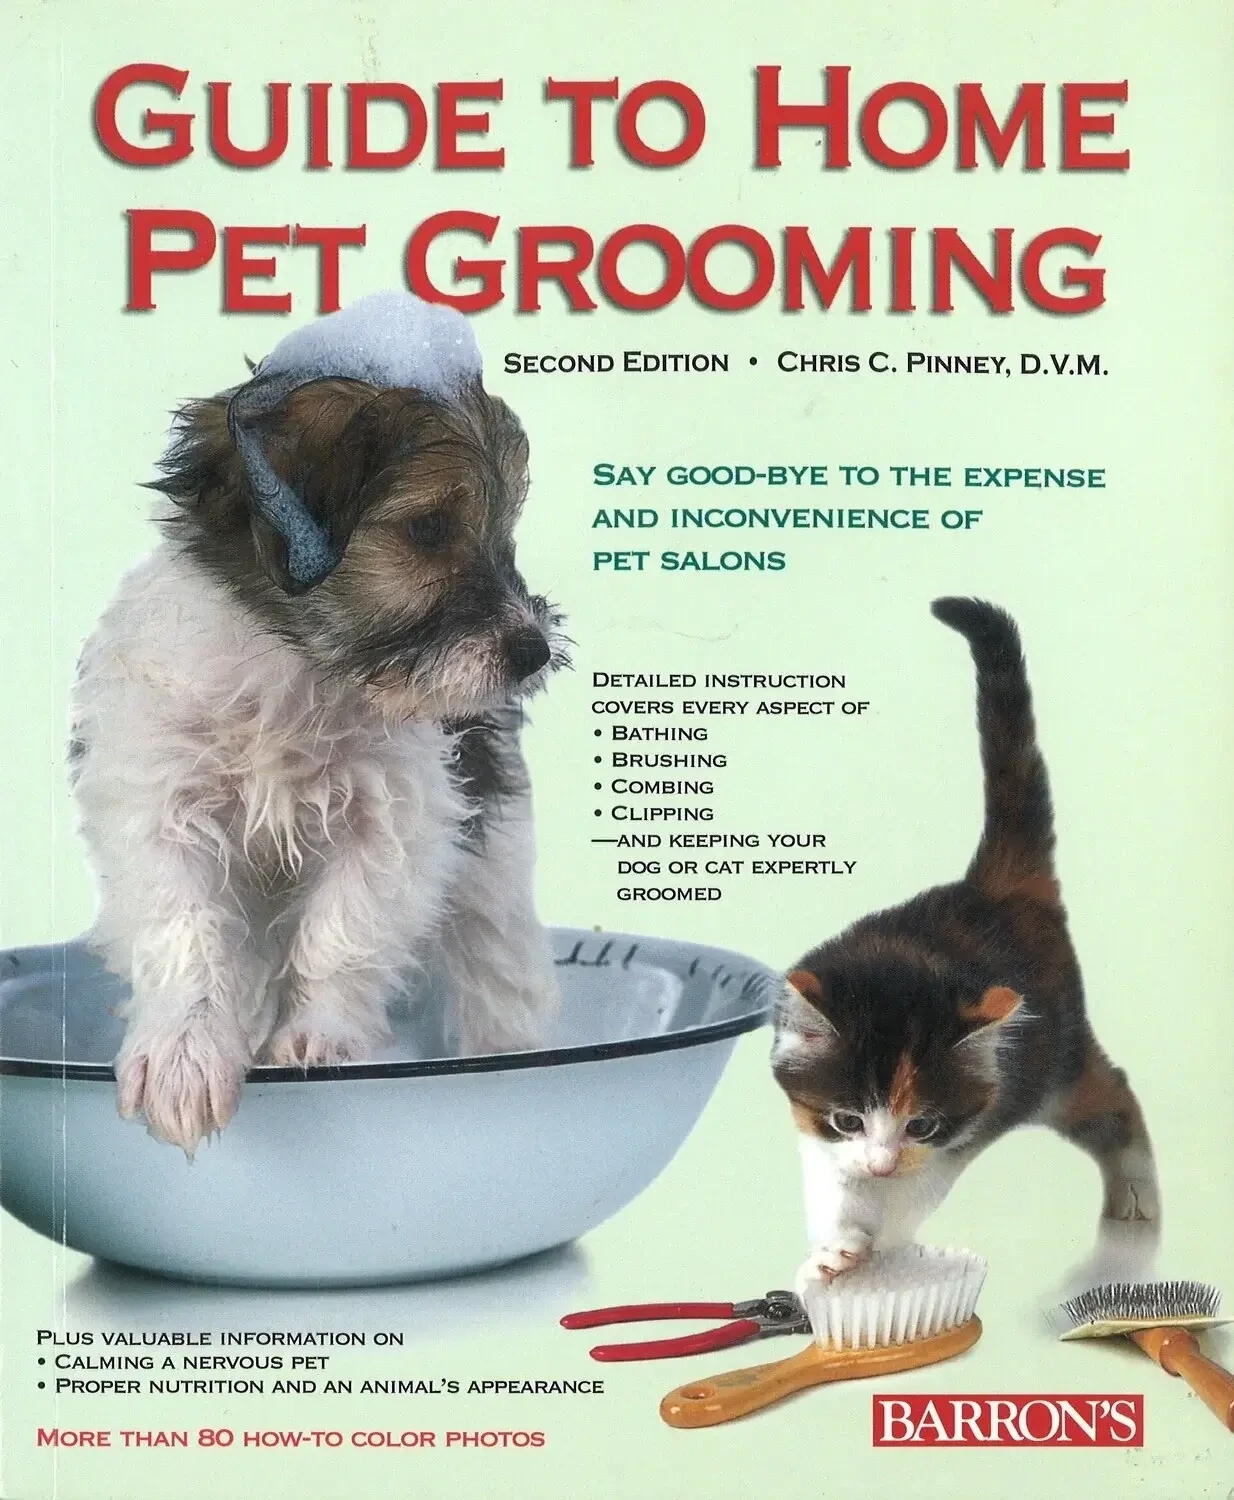 Guide to Home Pet Grooming 2nd Ed. by Chris C. Pinney